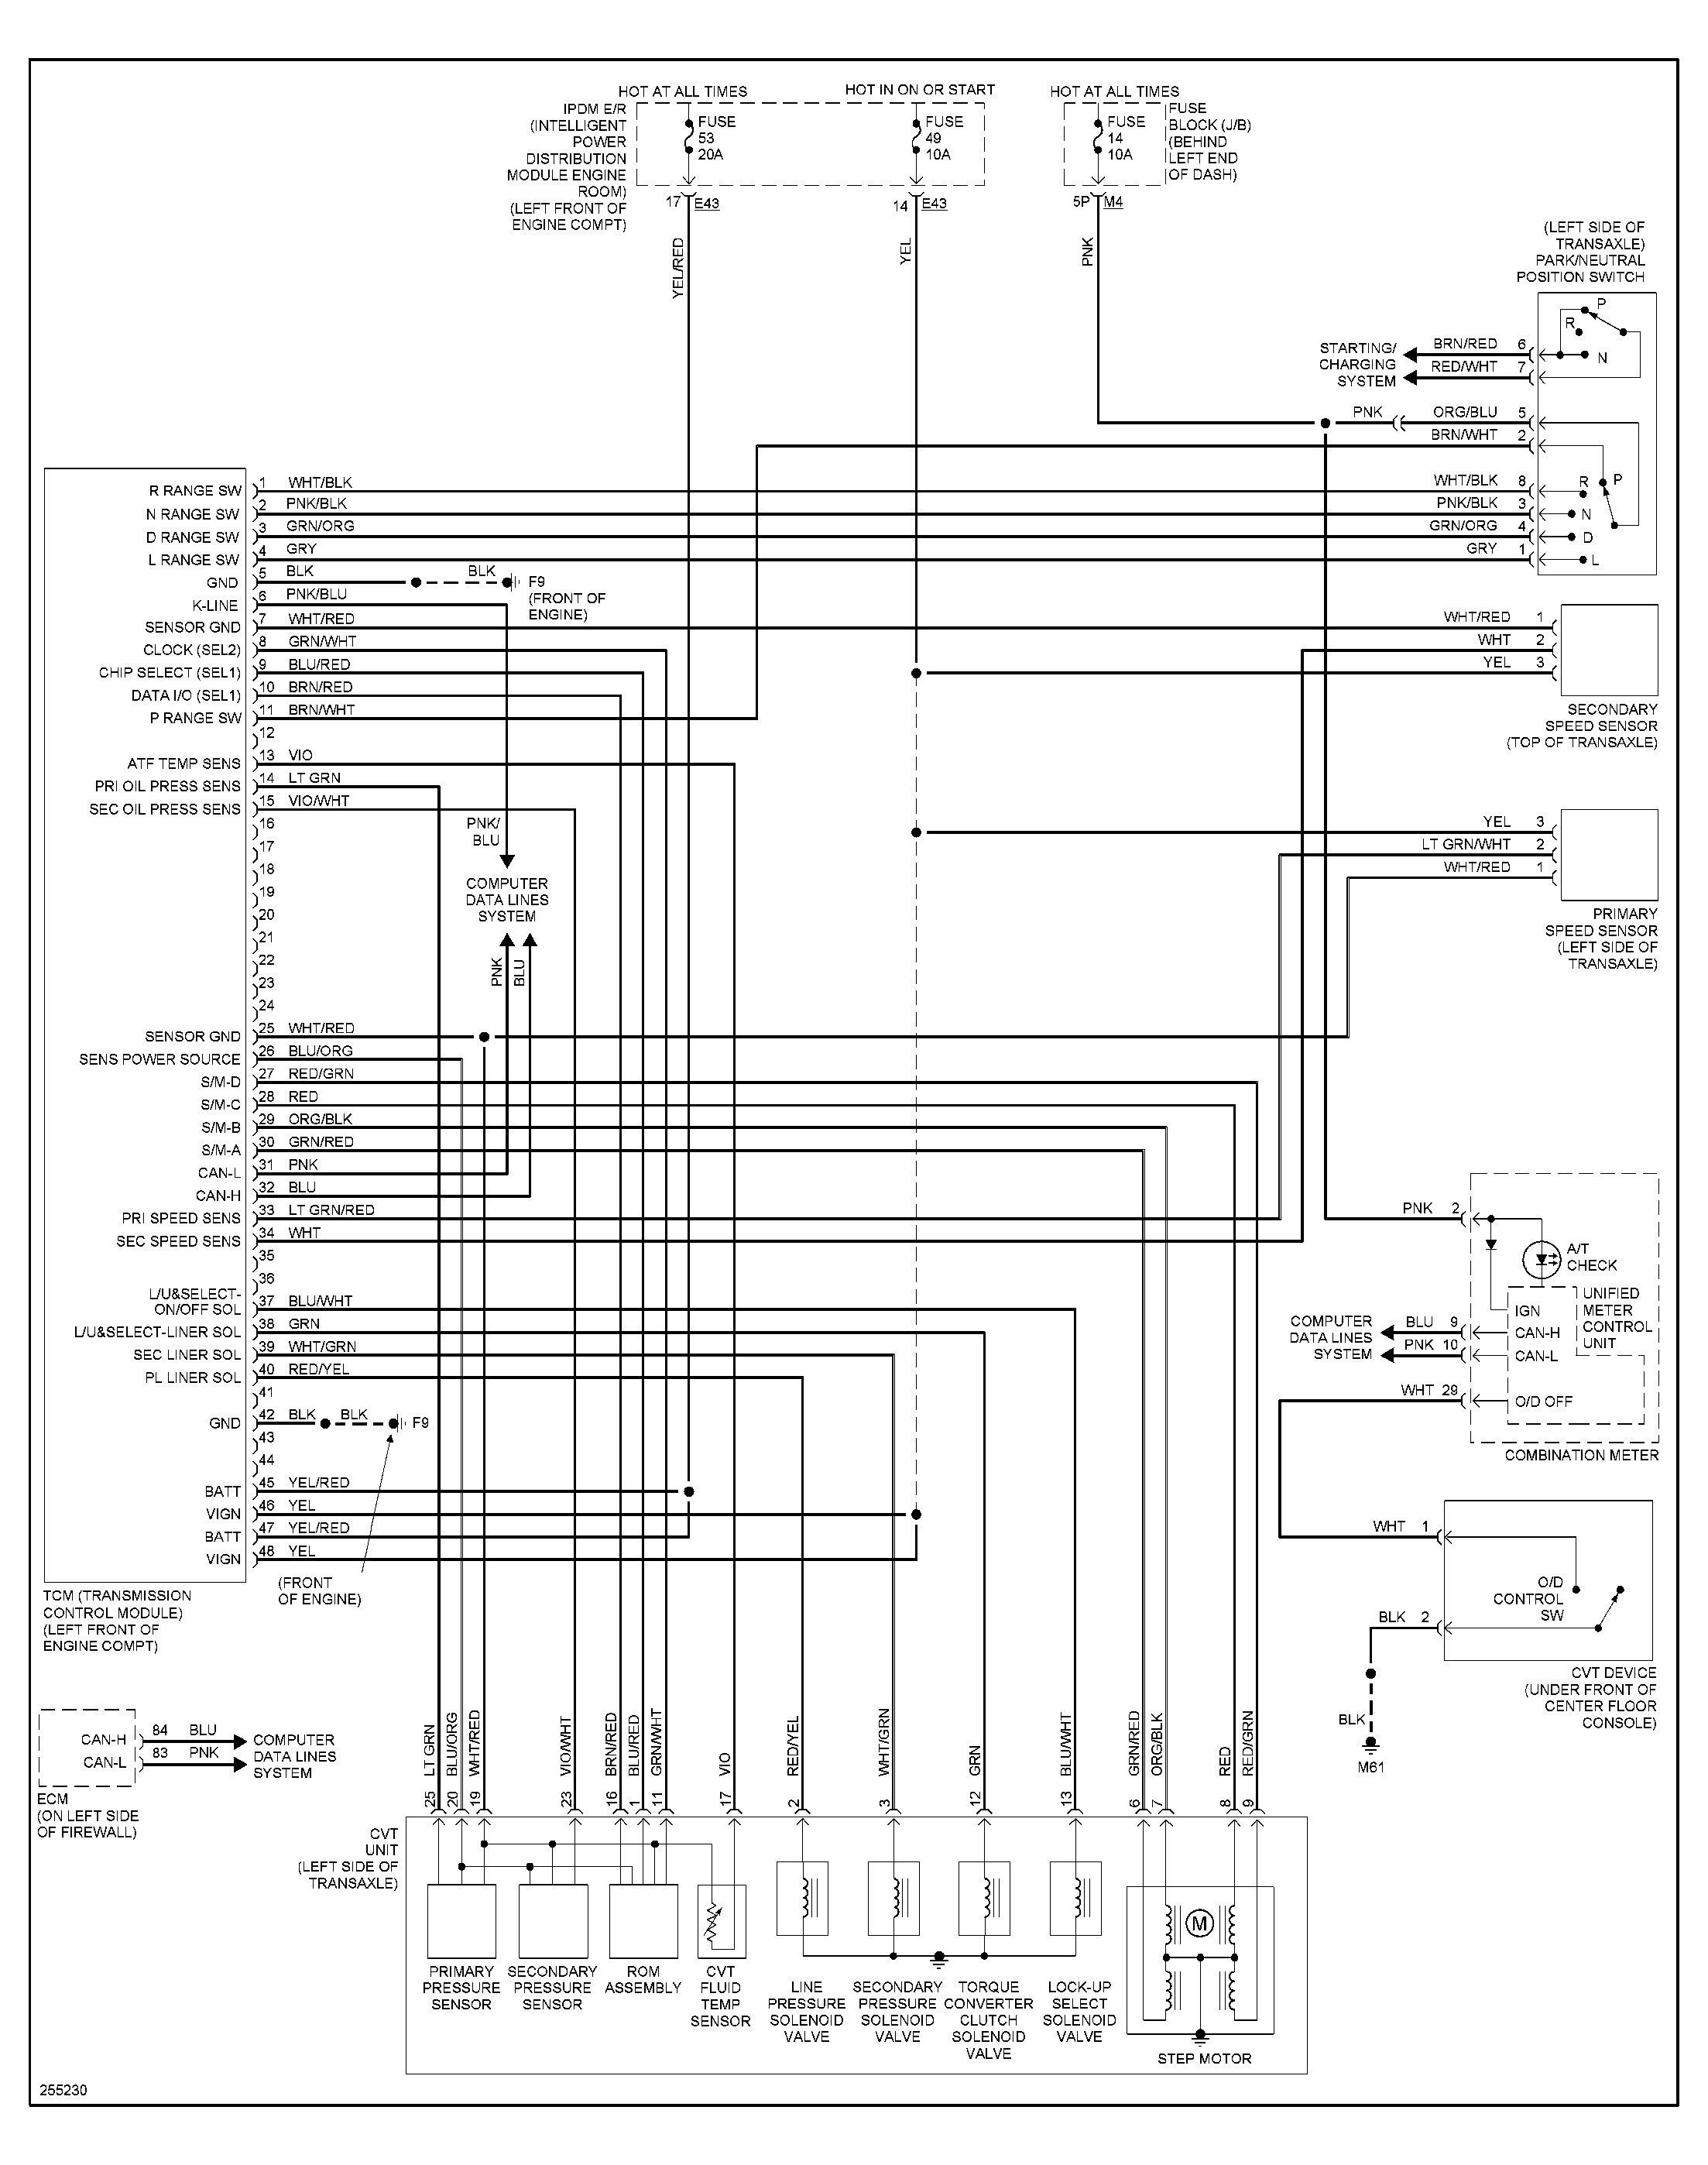 1998 Nissan Altima Engine Diagram 98 Sentra Engine Diagram Another Blog About Wiring Diagram • Of 1998 Nissan Altima Engine Diagram